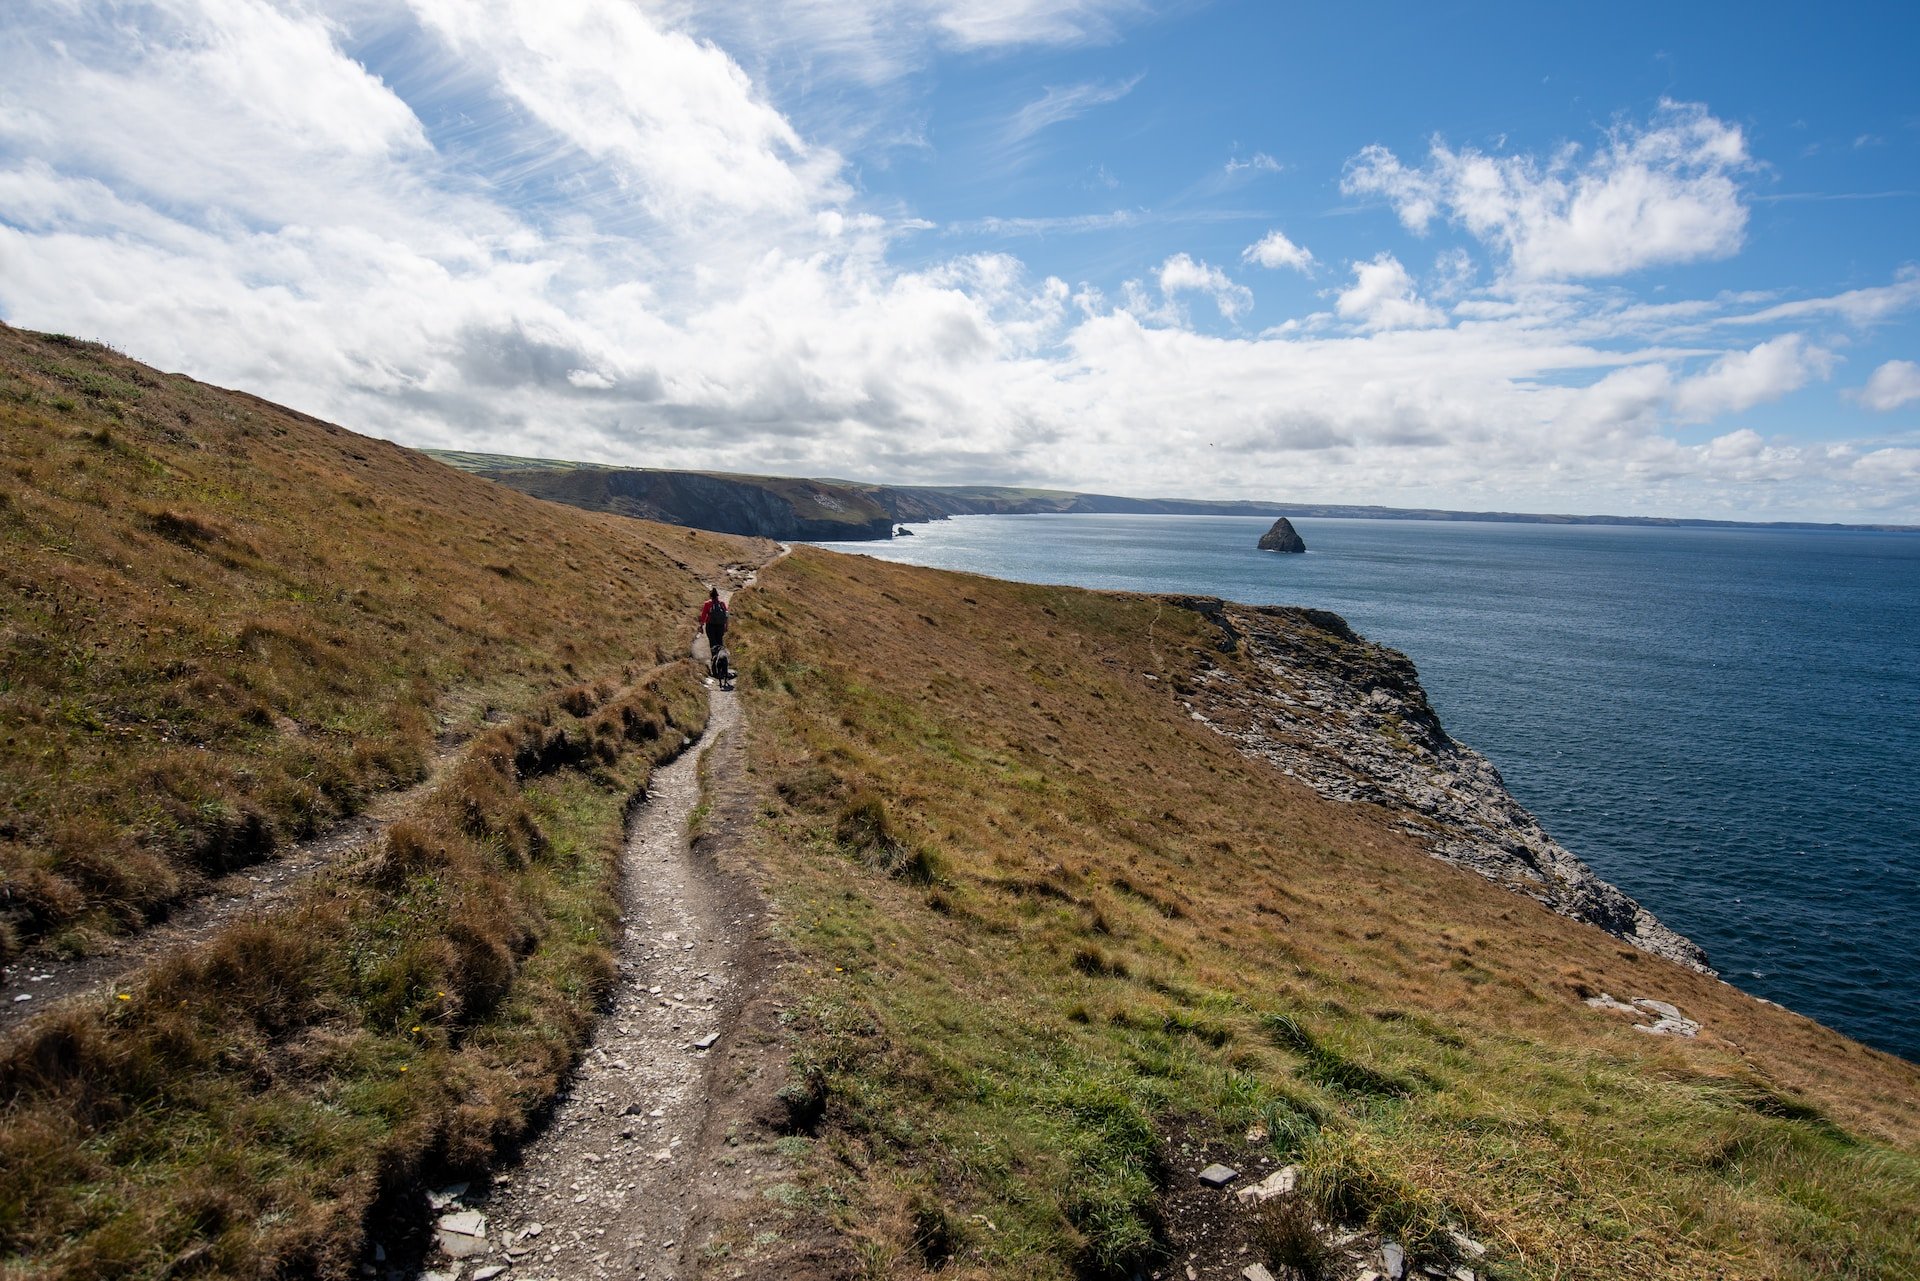 Park your caravan and go backpacking along the South West Coast Path in Cornwall, UK (photo: Crispin Jones)